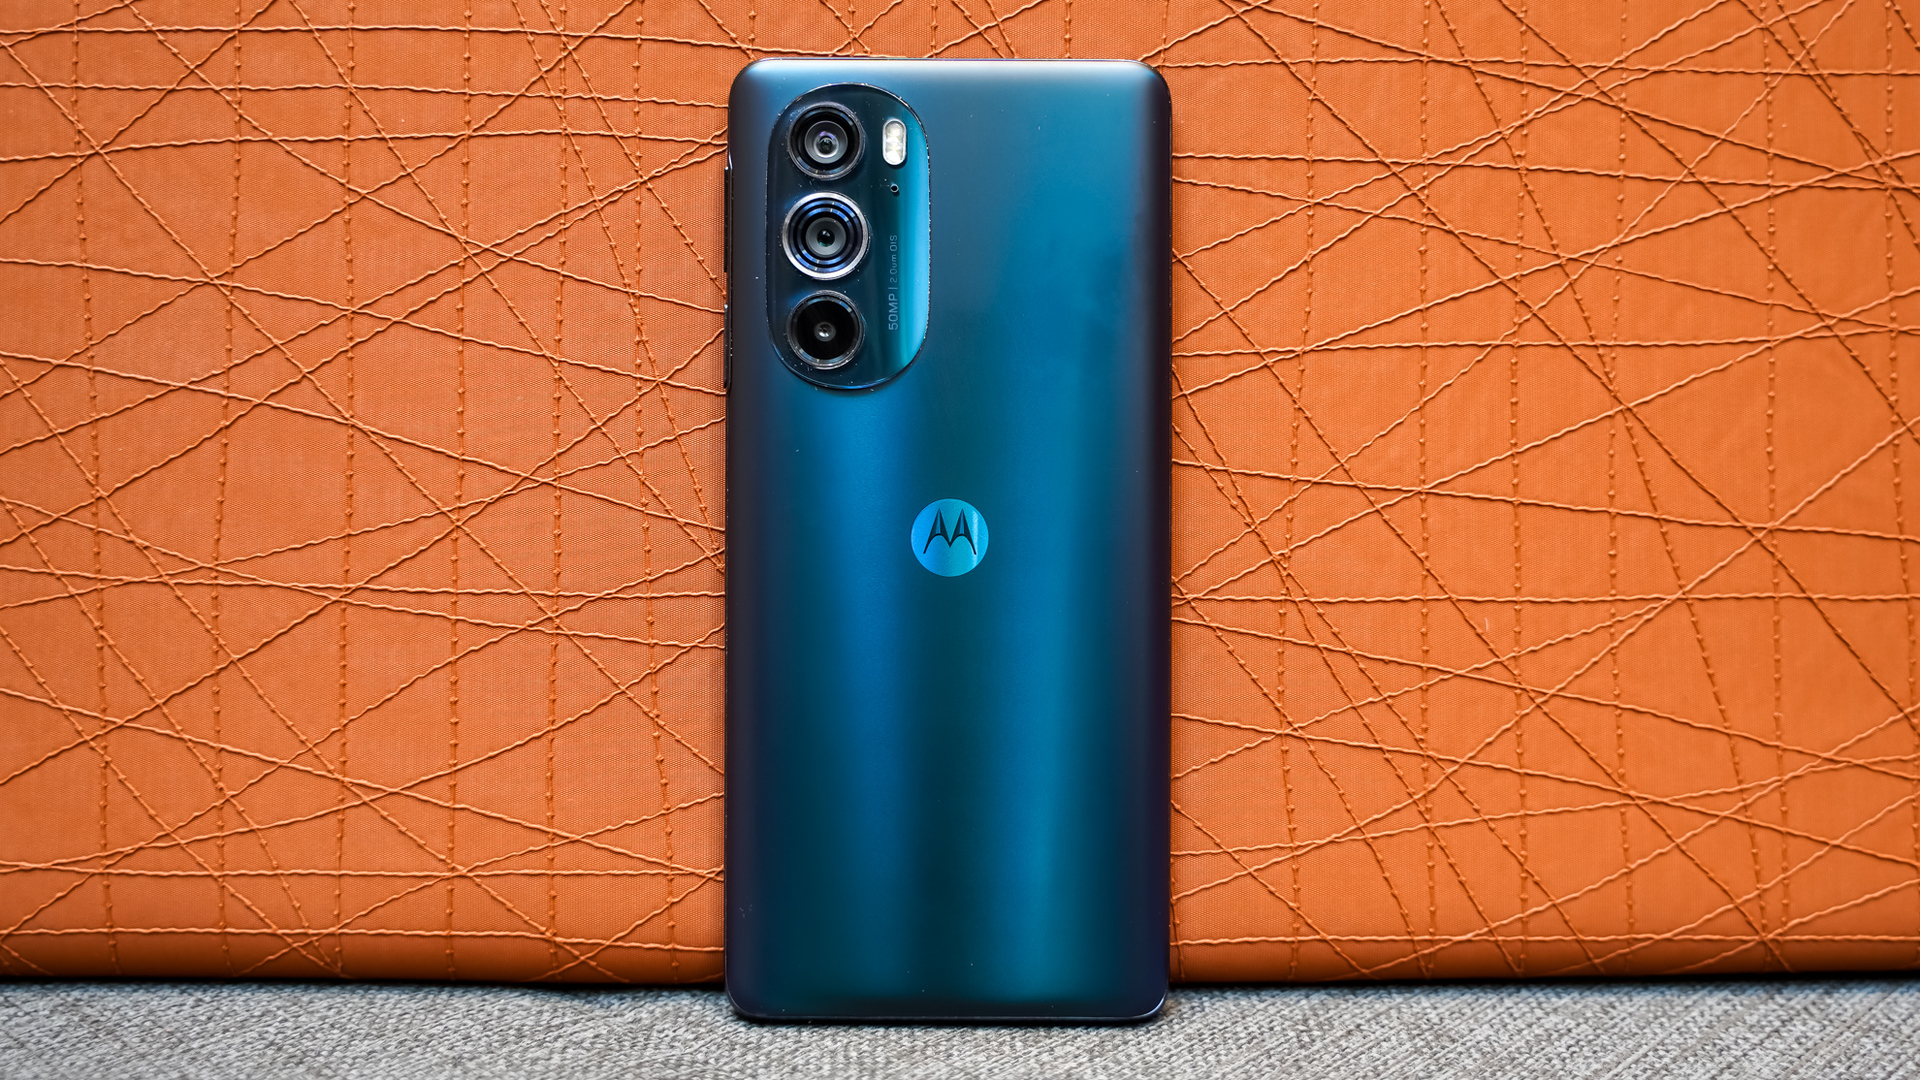 Motorola Edge Plus 2022 rear centered on couch